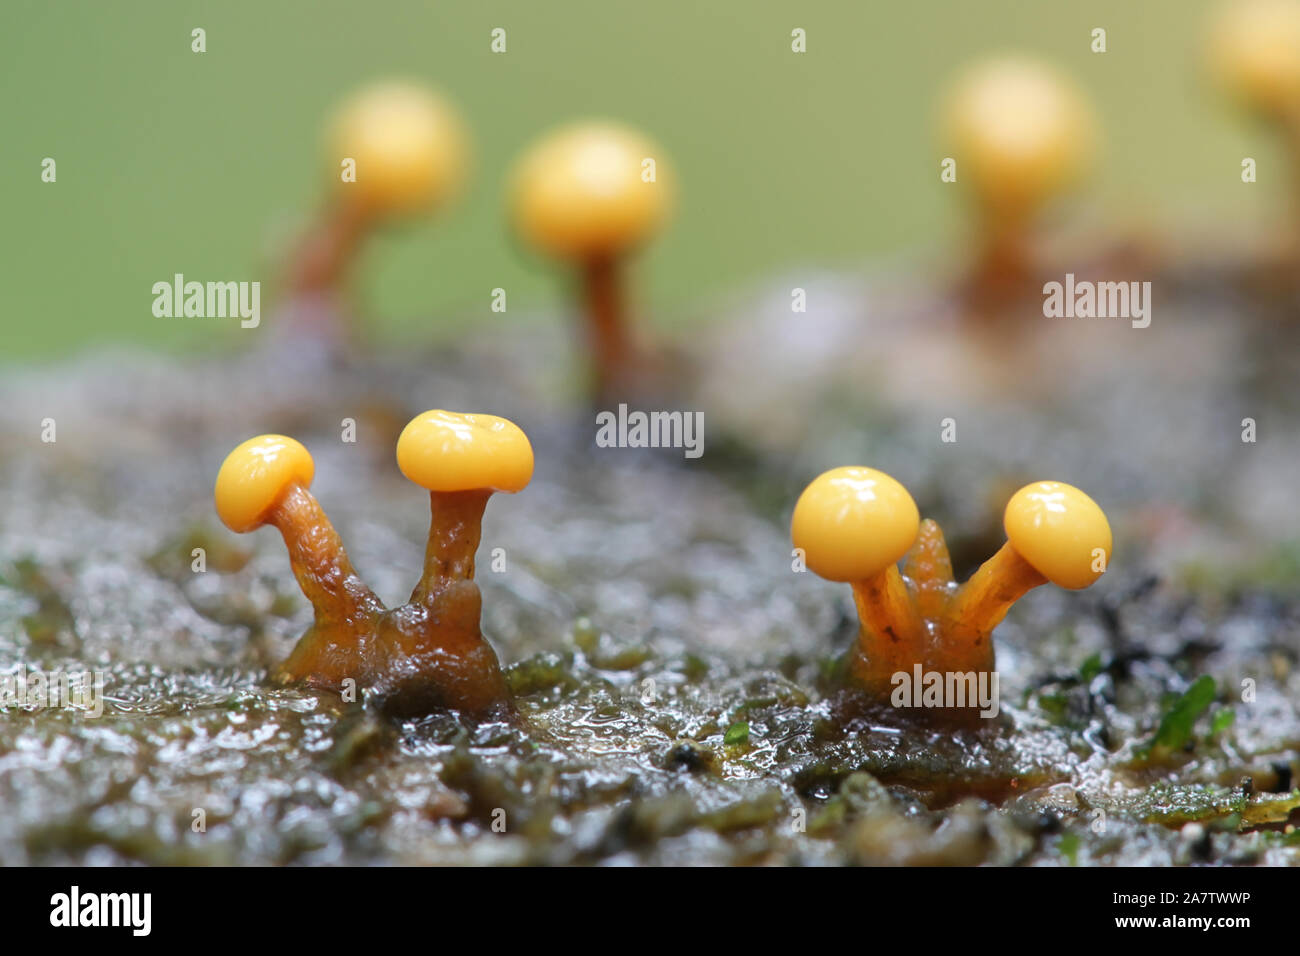 Lepidoderma tigrinum, known as spotted tiger slime mold, maturing sporangia from Finland Stock Photo